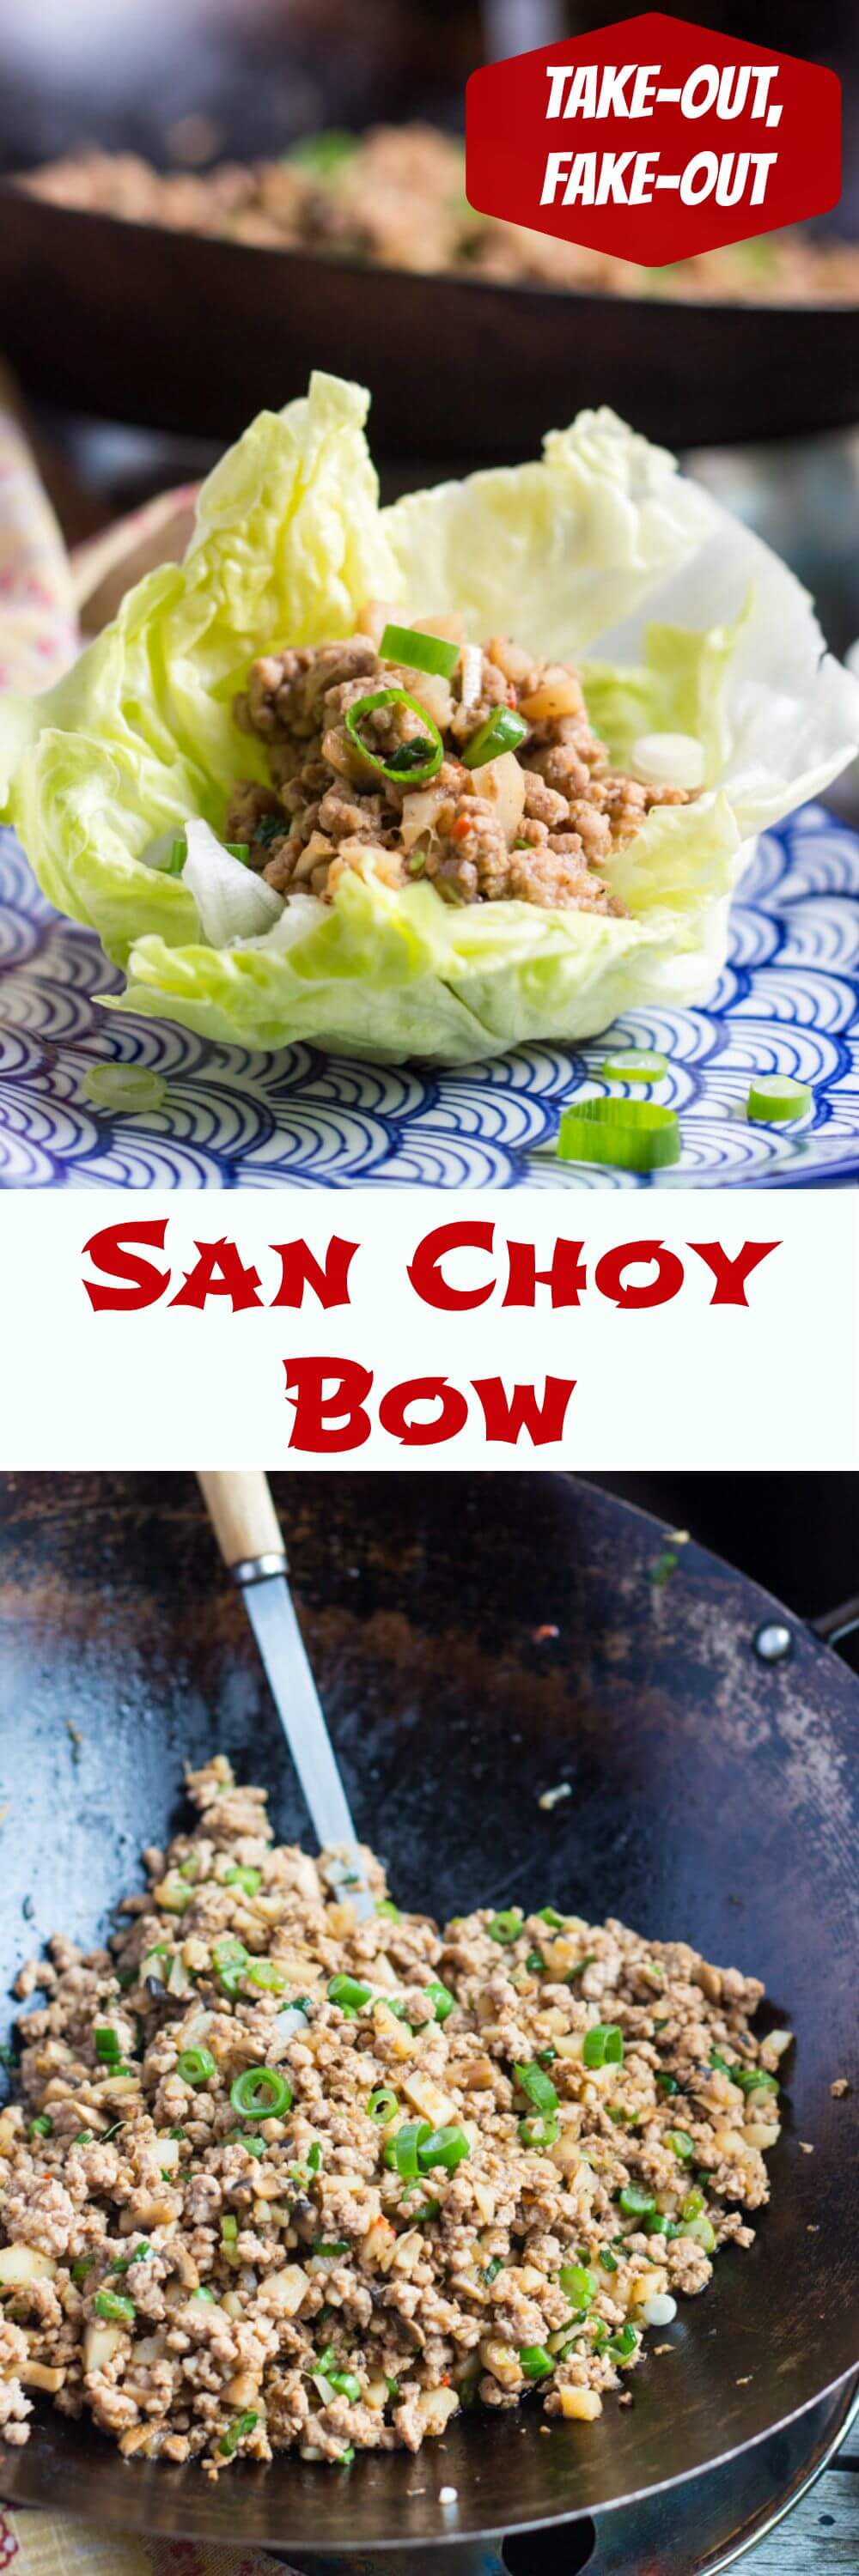 Take-out, Fake-out: San Choy Bow in Just 25 Minutes